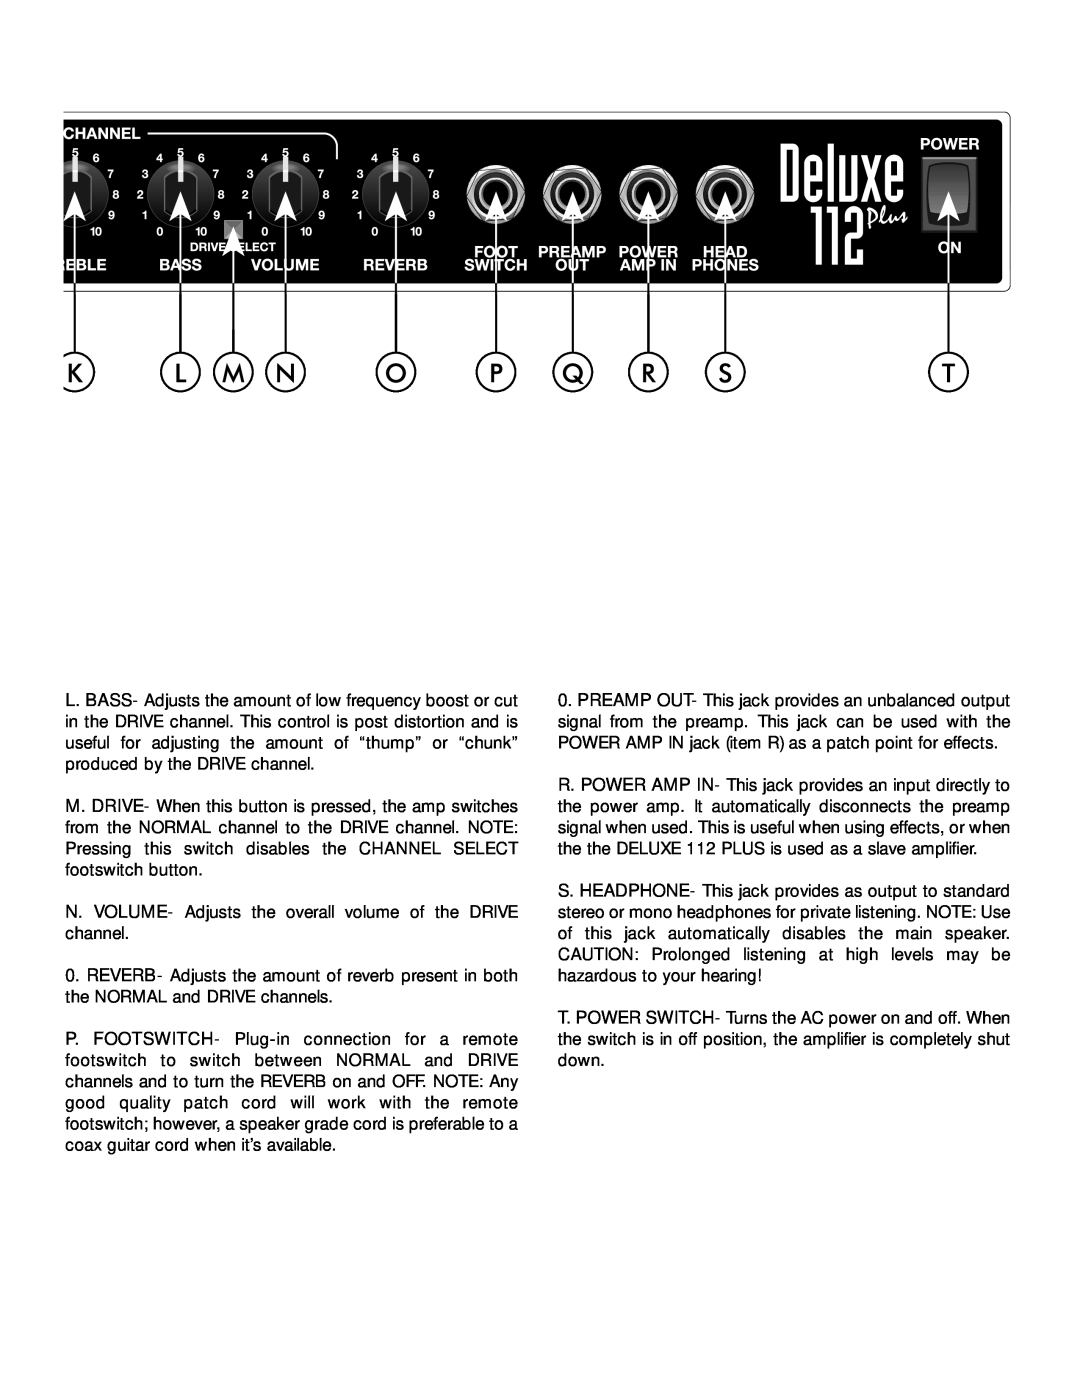 Fender 112 owner manual N. VOLUME- Adjusts the overall volume of the DRIVE channel 